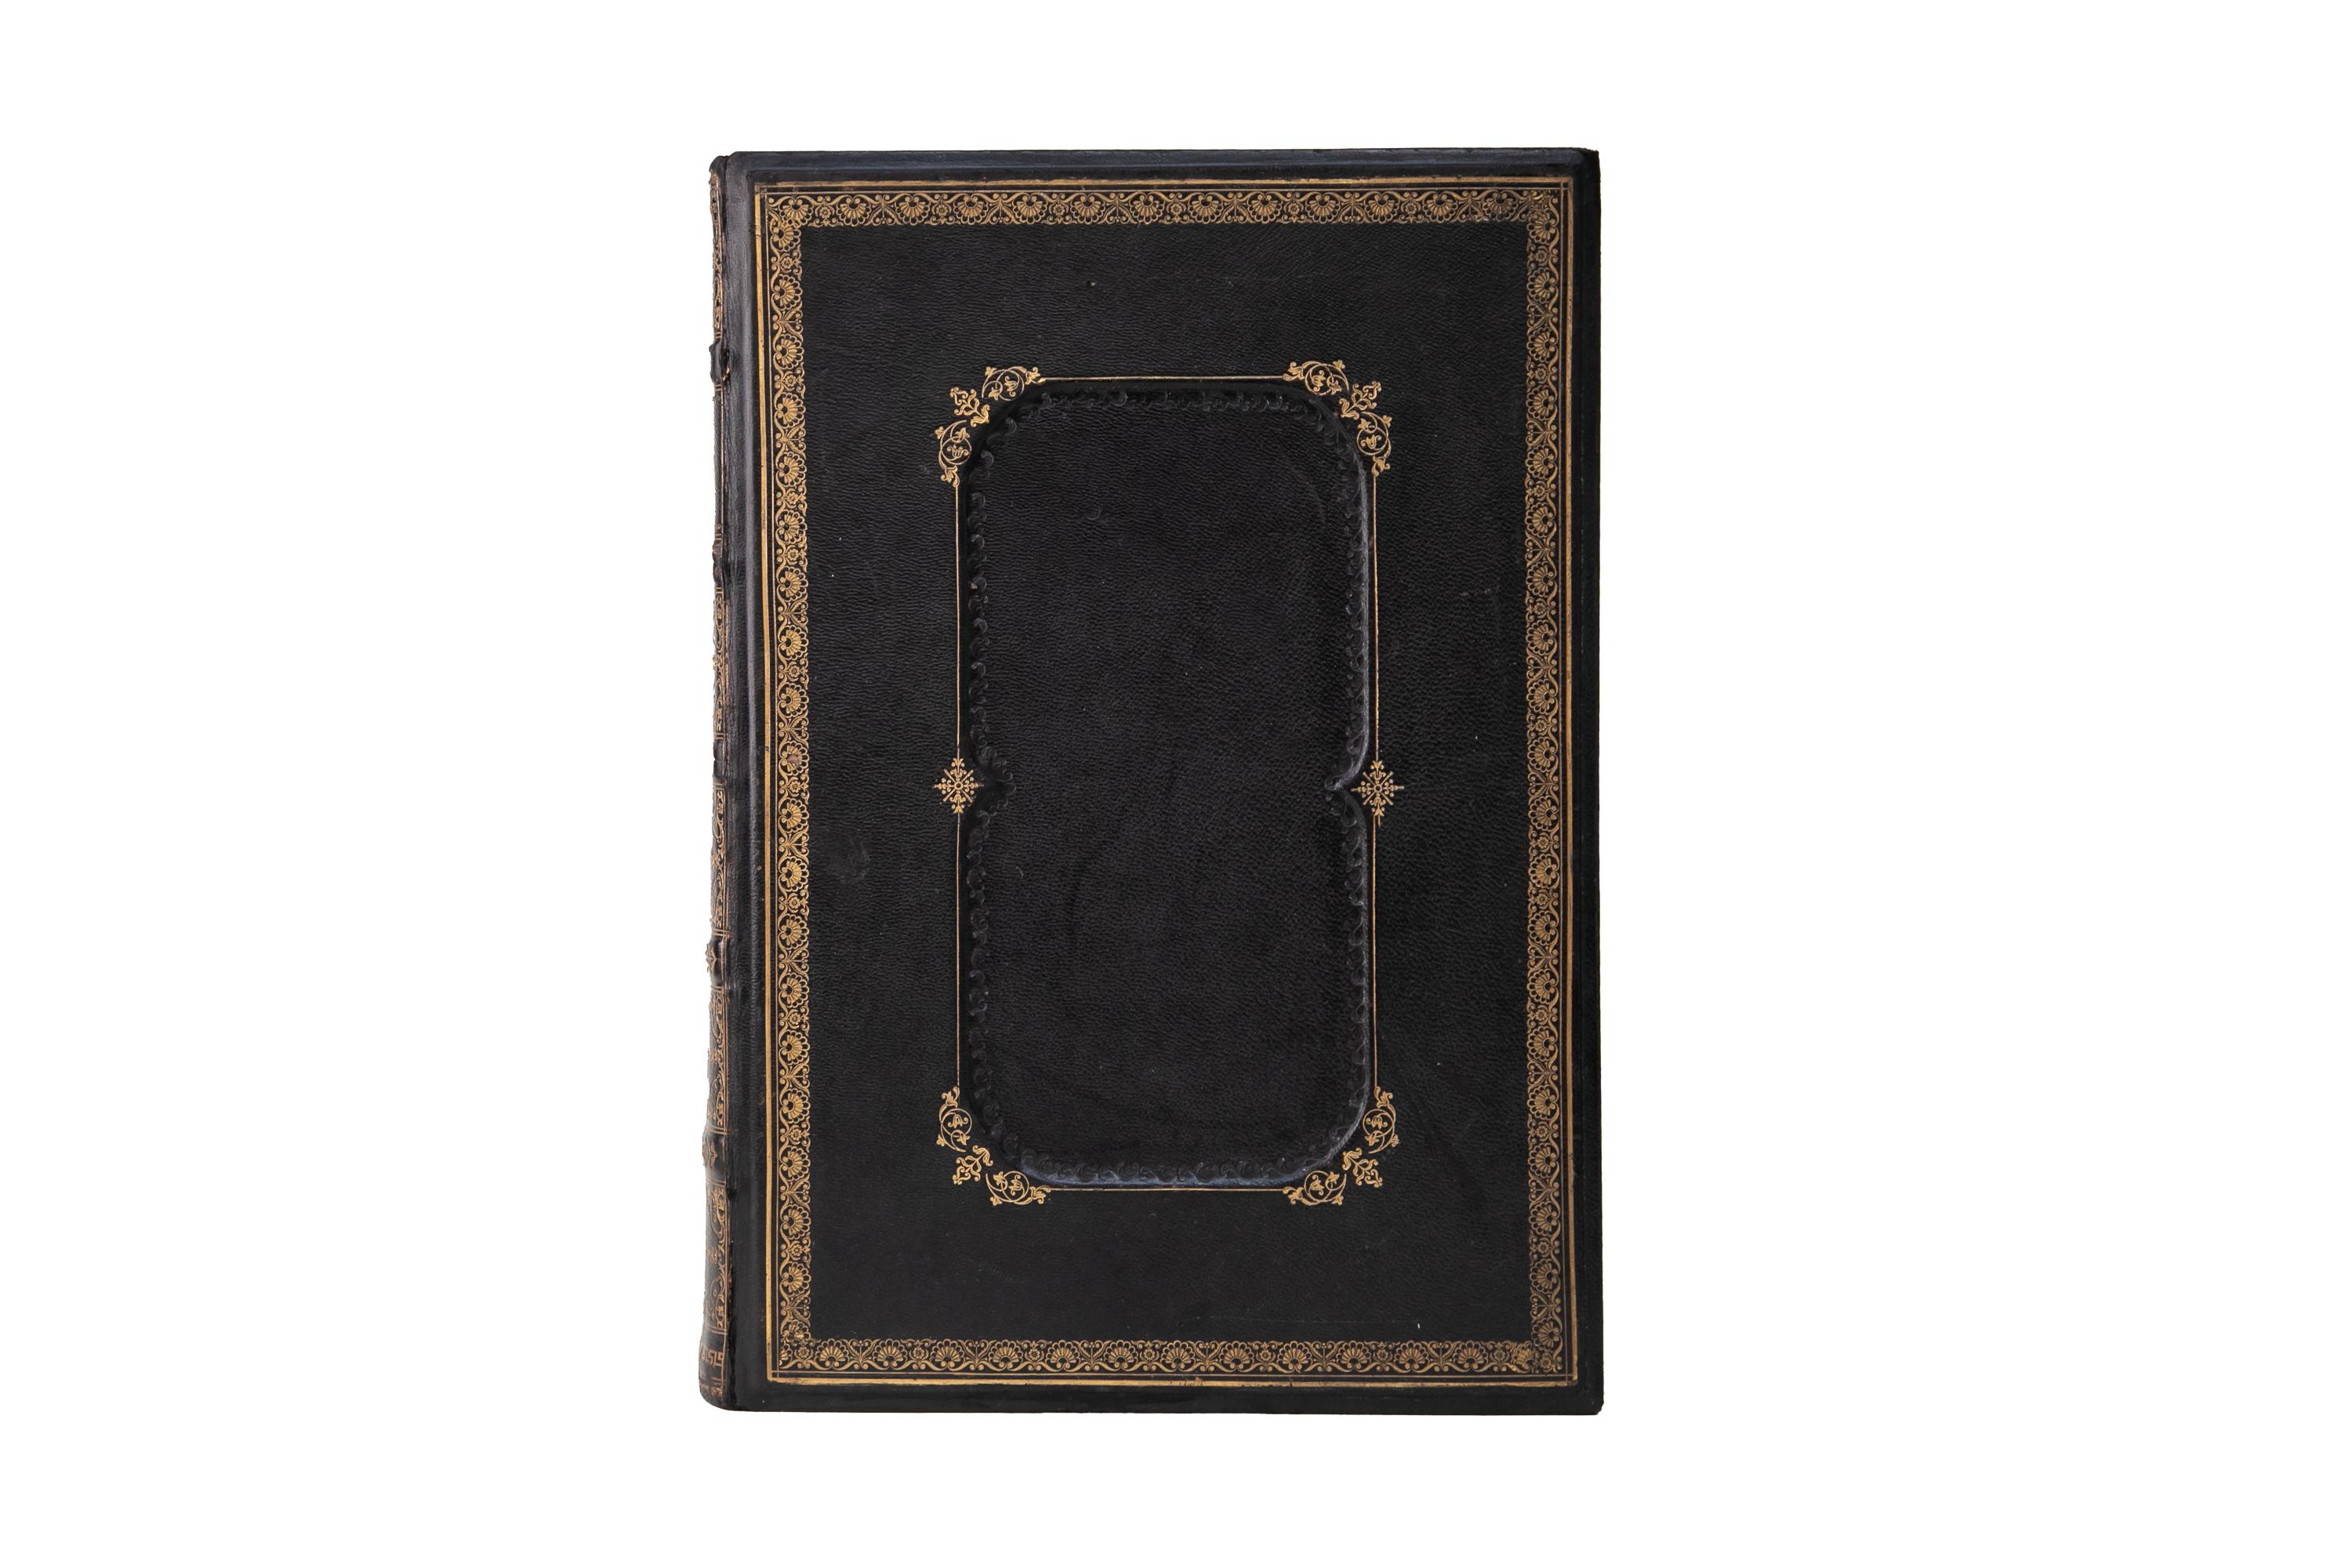 1 Volume. John Brown, The Self-Interpreting Holy Bible. Bound in full black morocco with the covers and raised bands displaying gilt-tooled detailing. All edges gilt, gilt-tooled dentelles, and marbled endpapers. Contains the Old and New Testaments